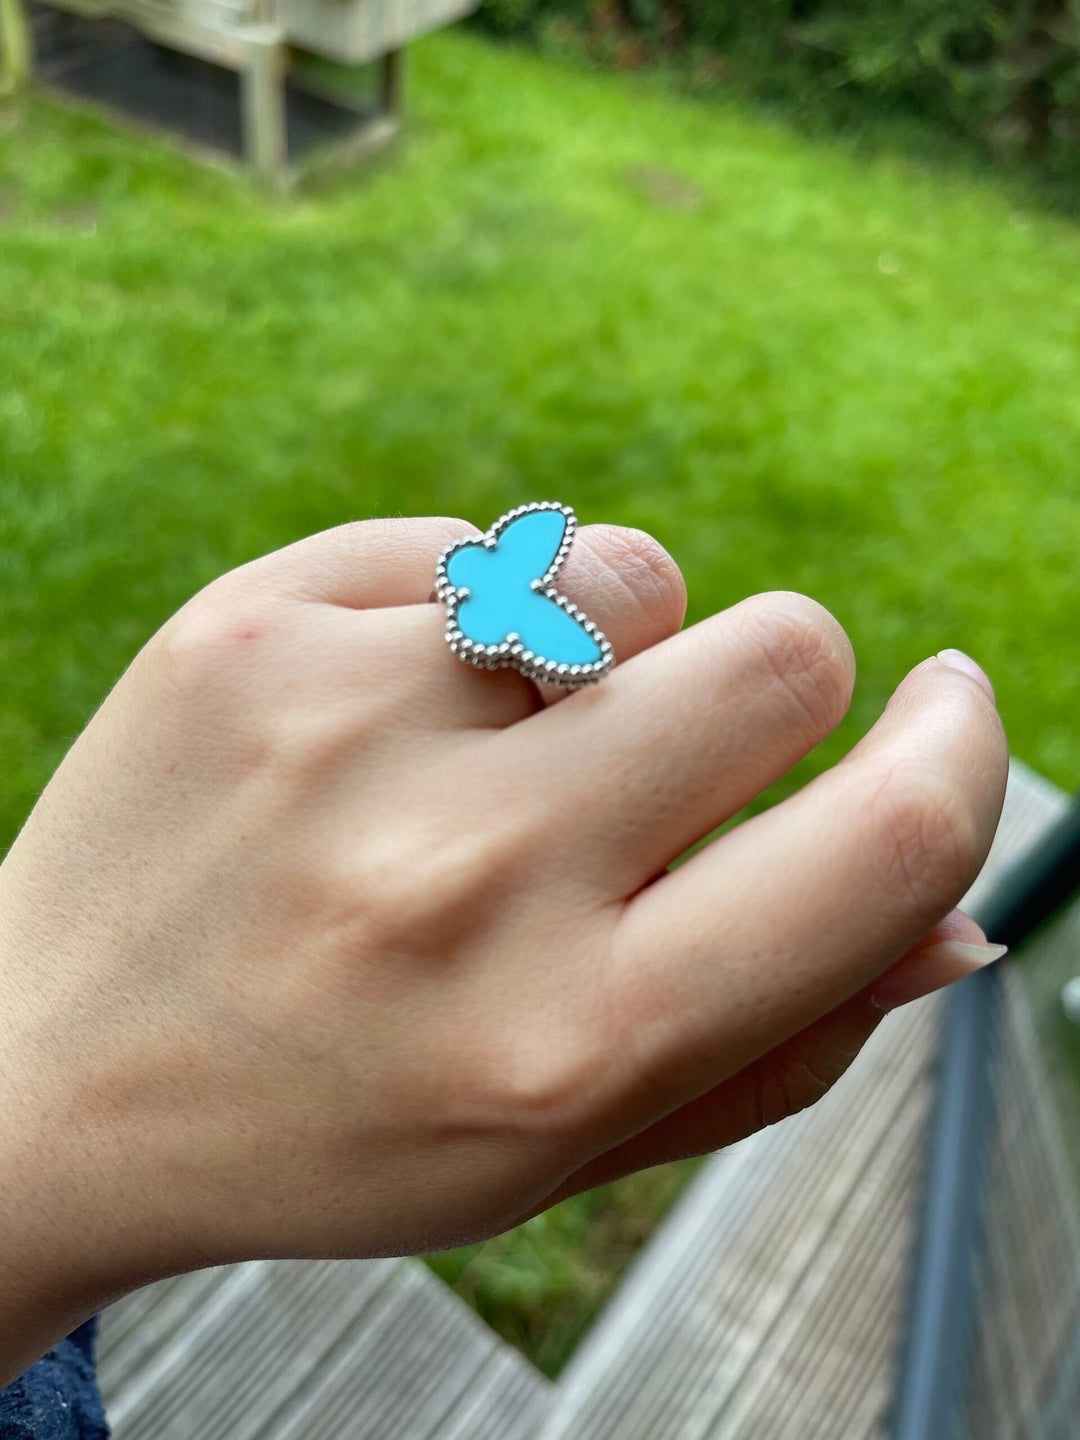 Van Cleef & Arpels Lukcy Alhambra Turquoise Butterfly Ring